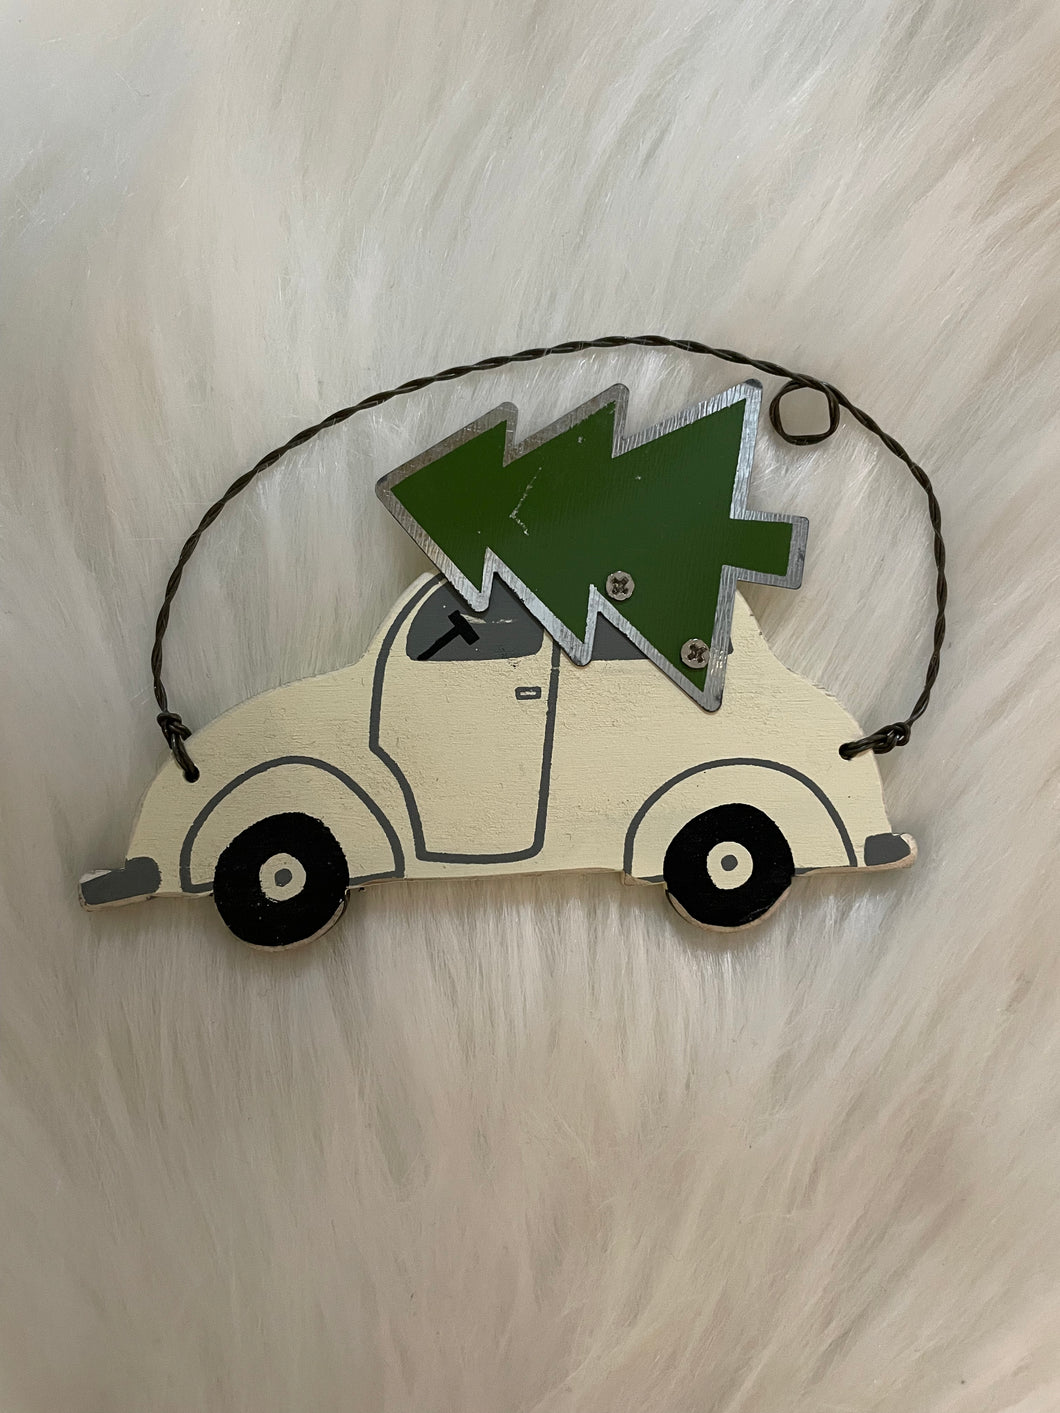 Car with Tree Ornament